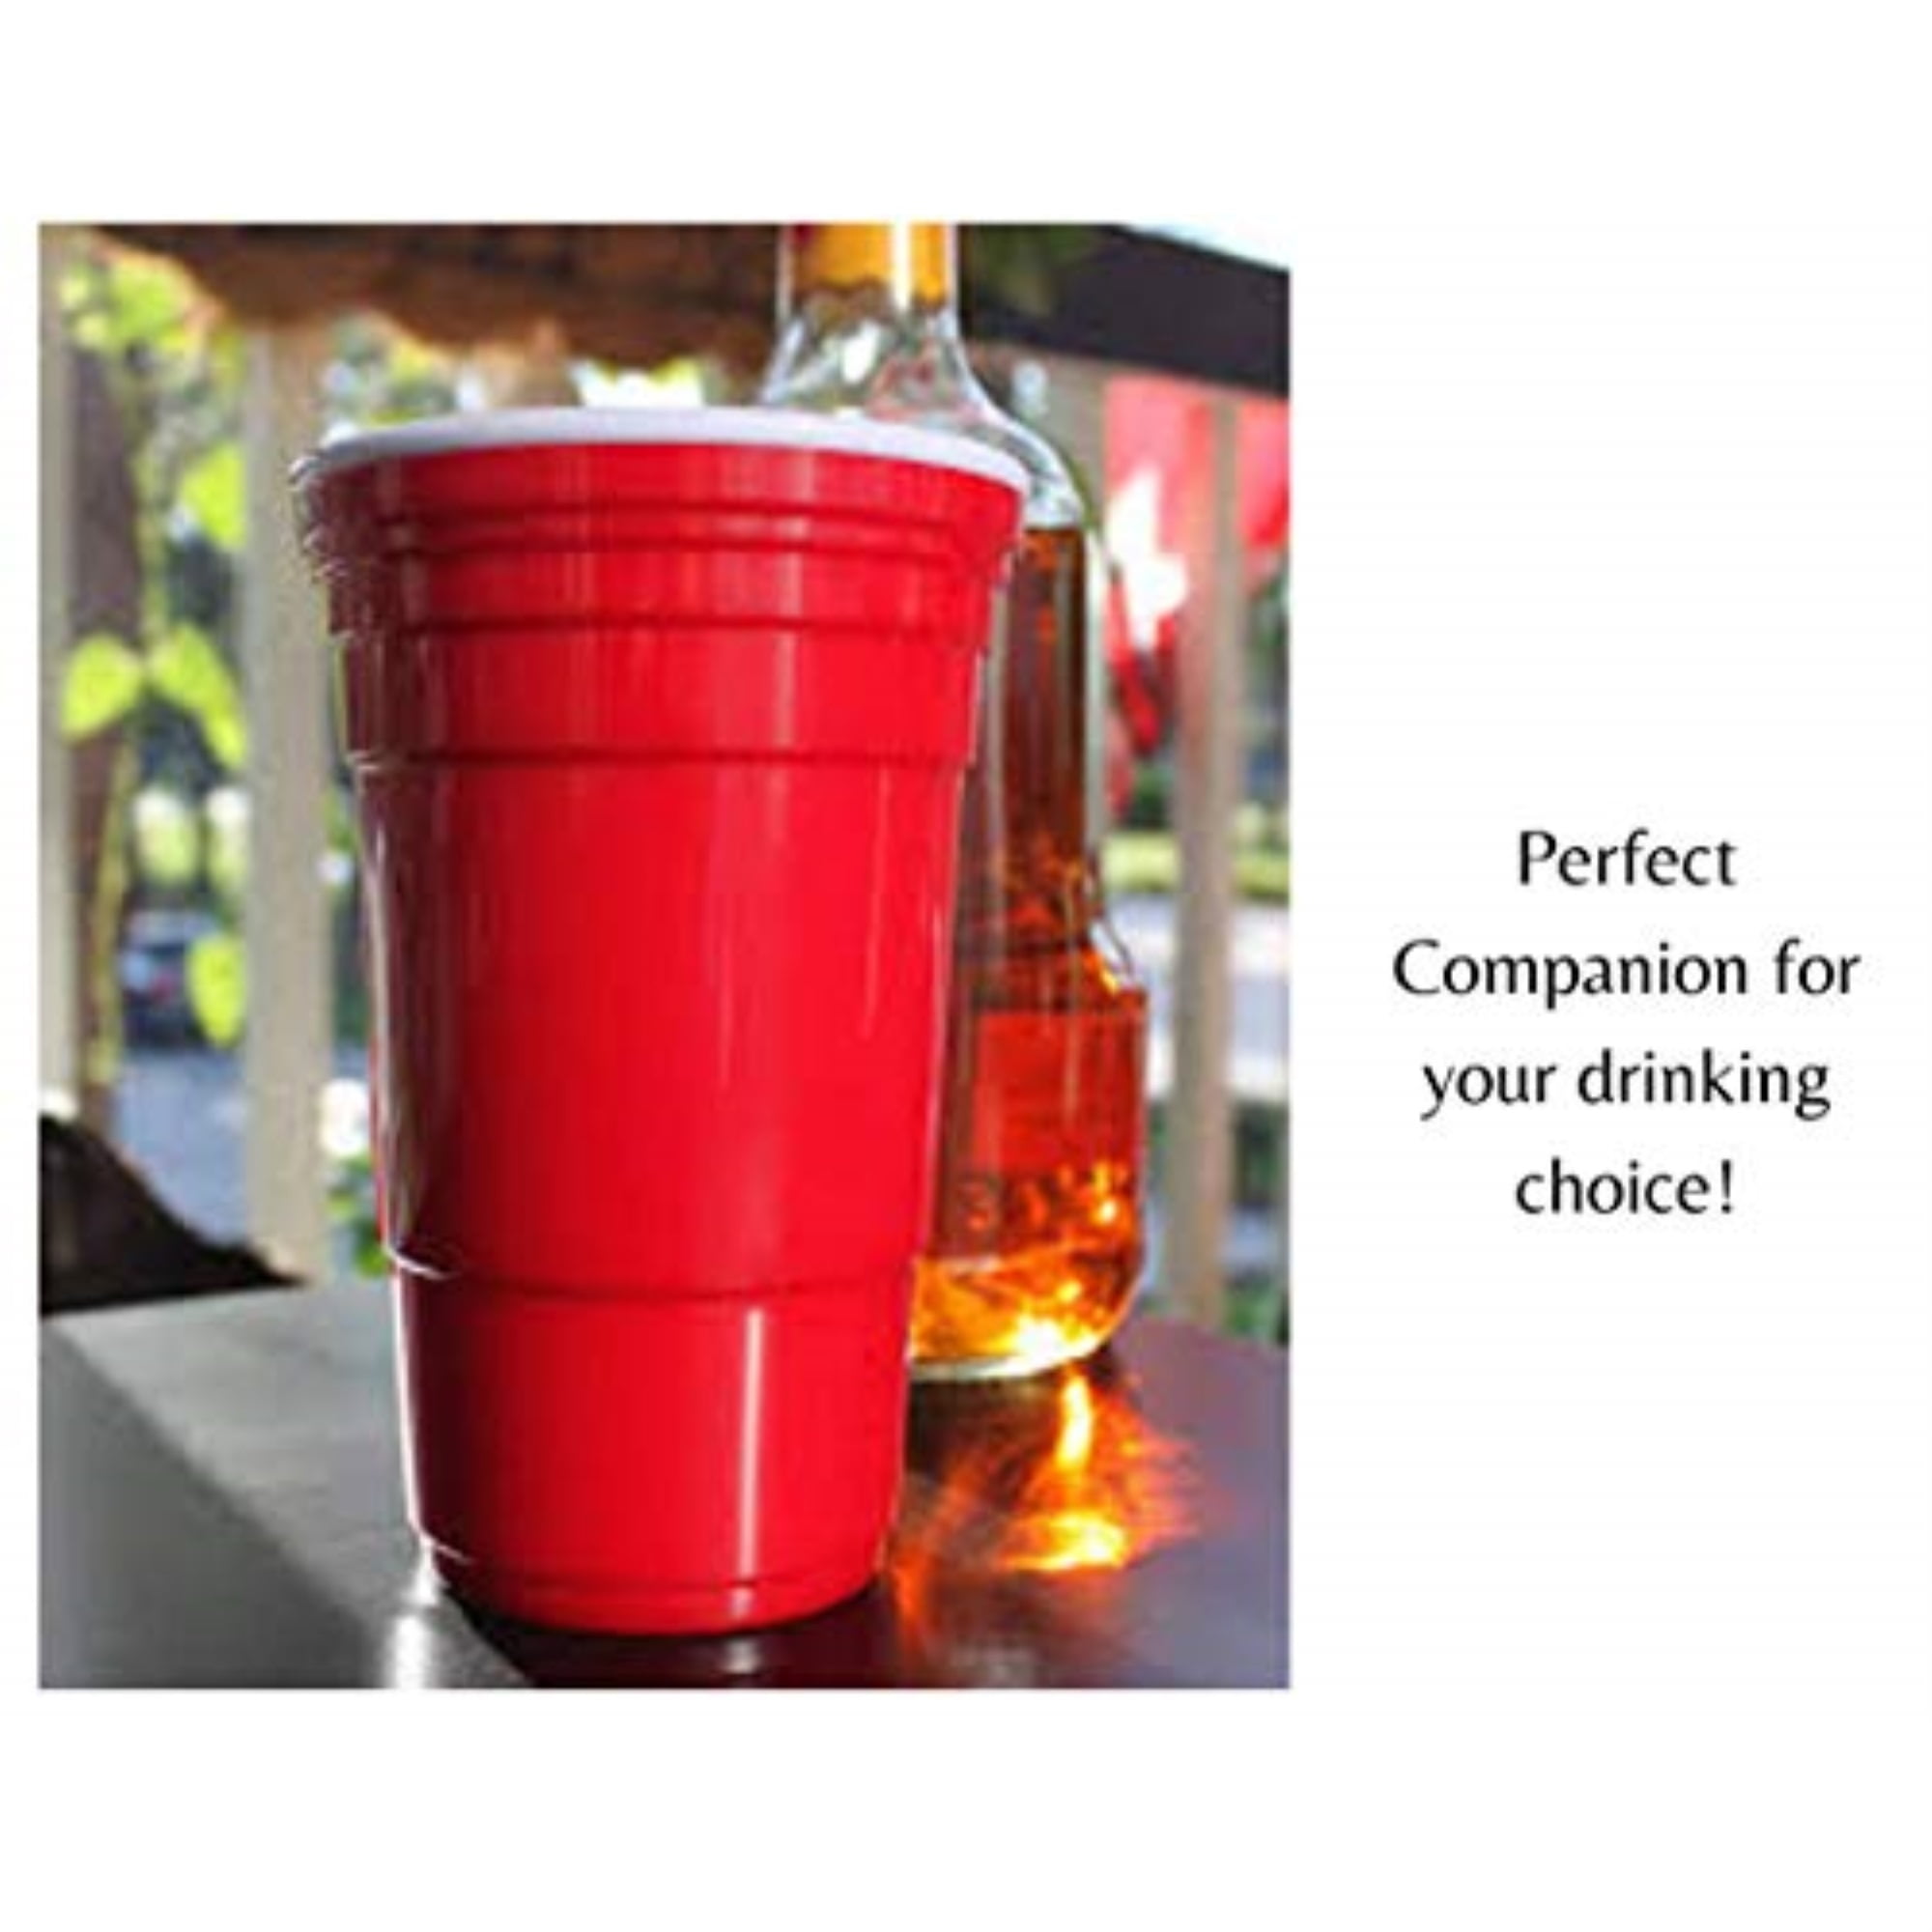 Can You Really Microwave reusable Solo Cups – Redcupliving